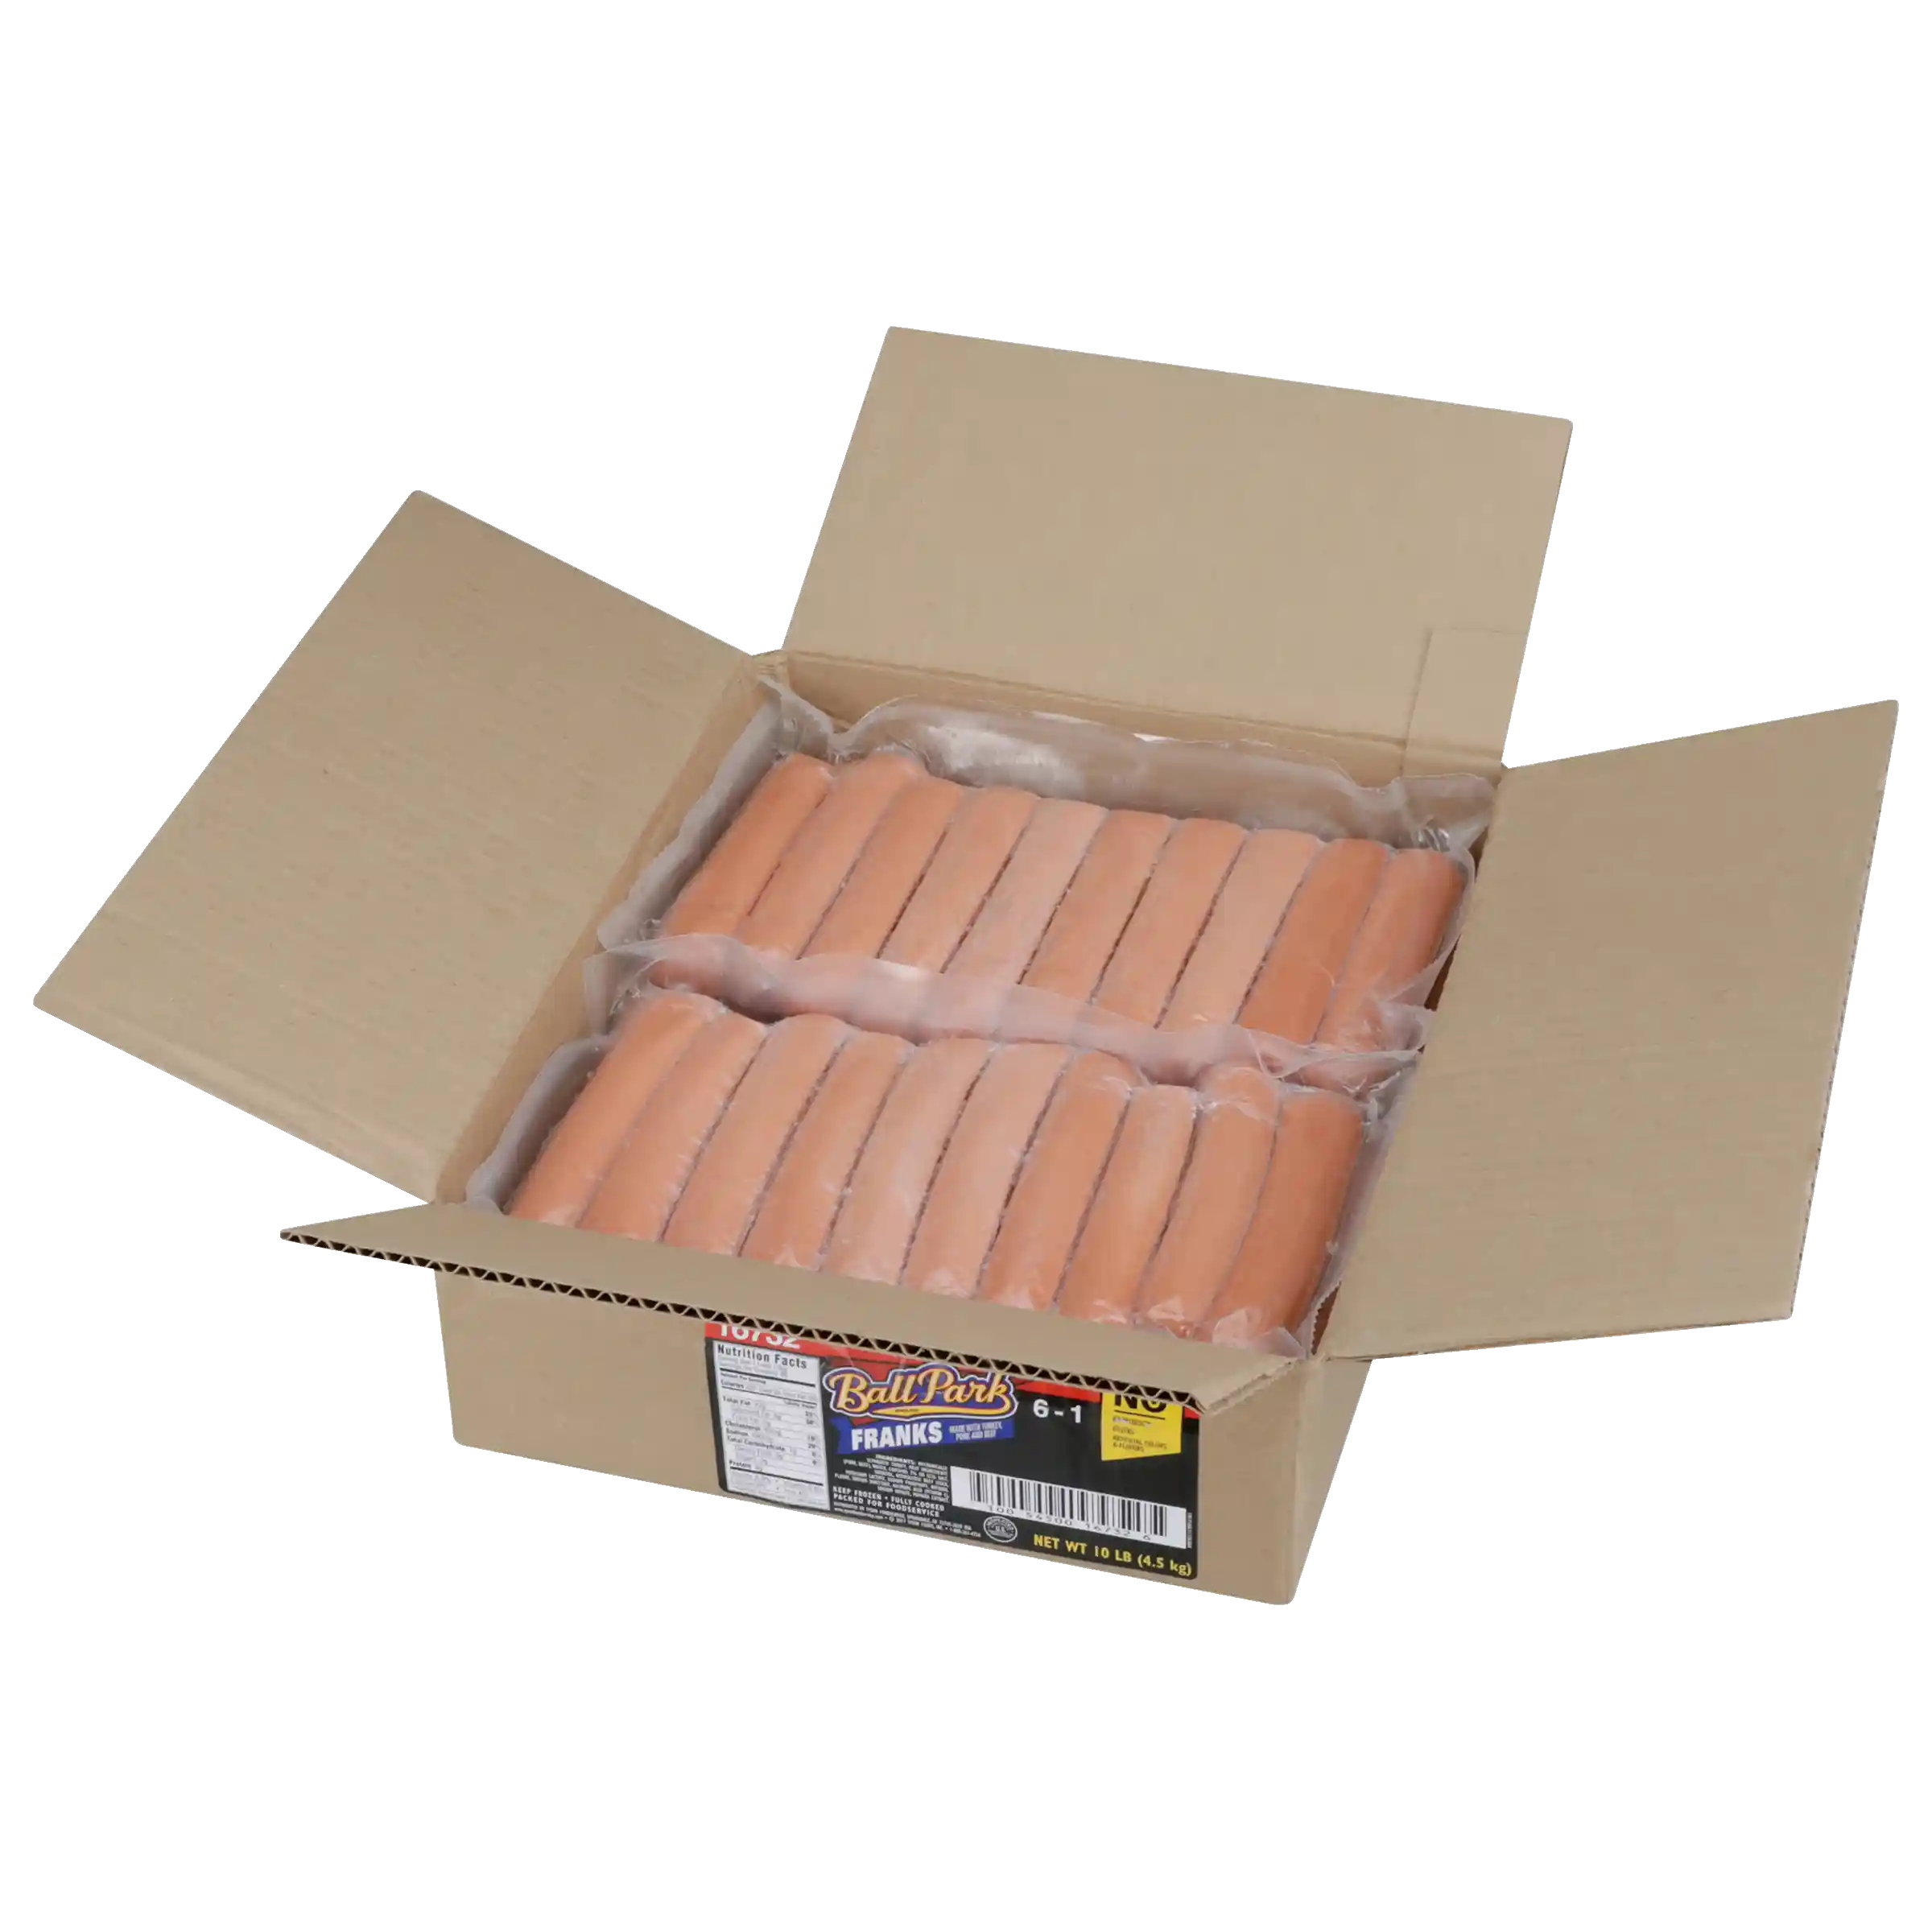 Ball Park® Three Meat Hot Dogs, 6:1 Links Per Lb, 6 Inch_image_31